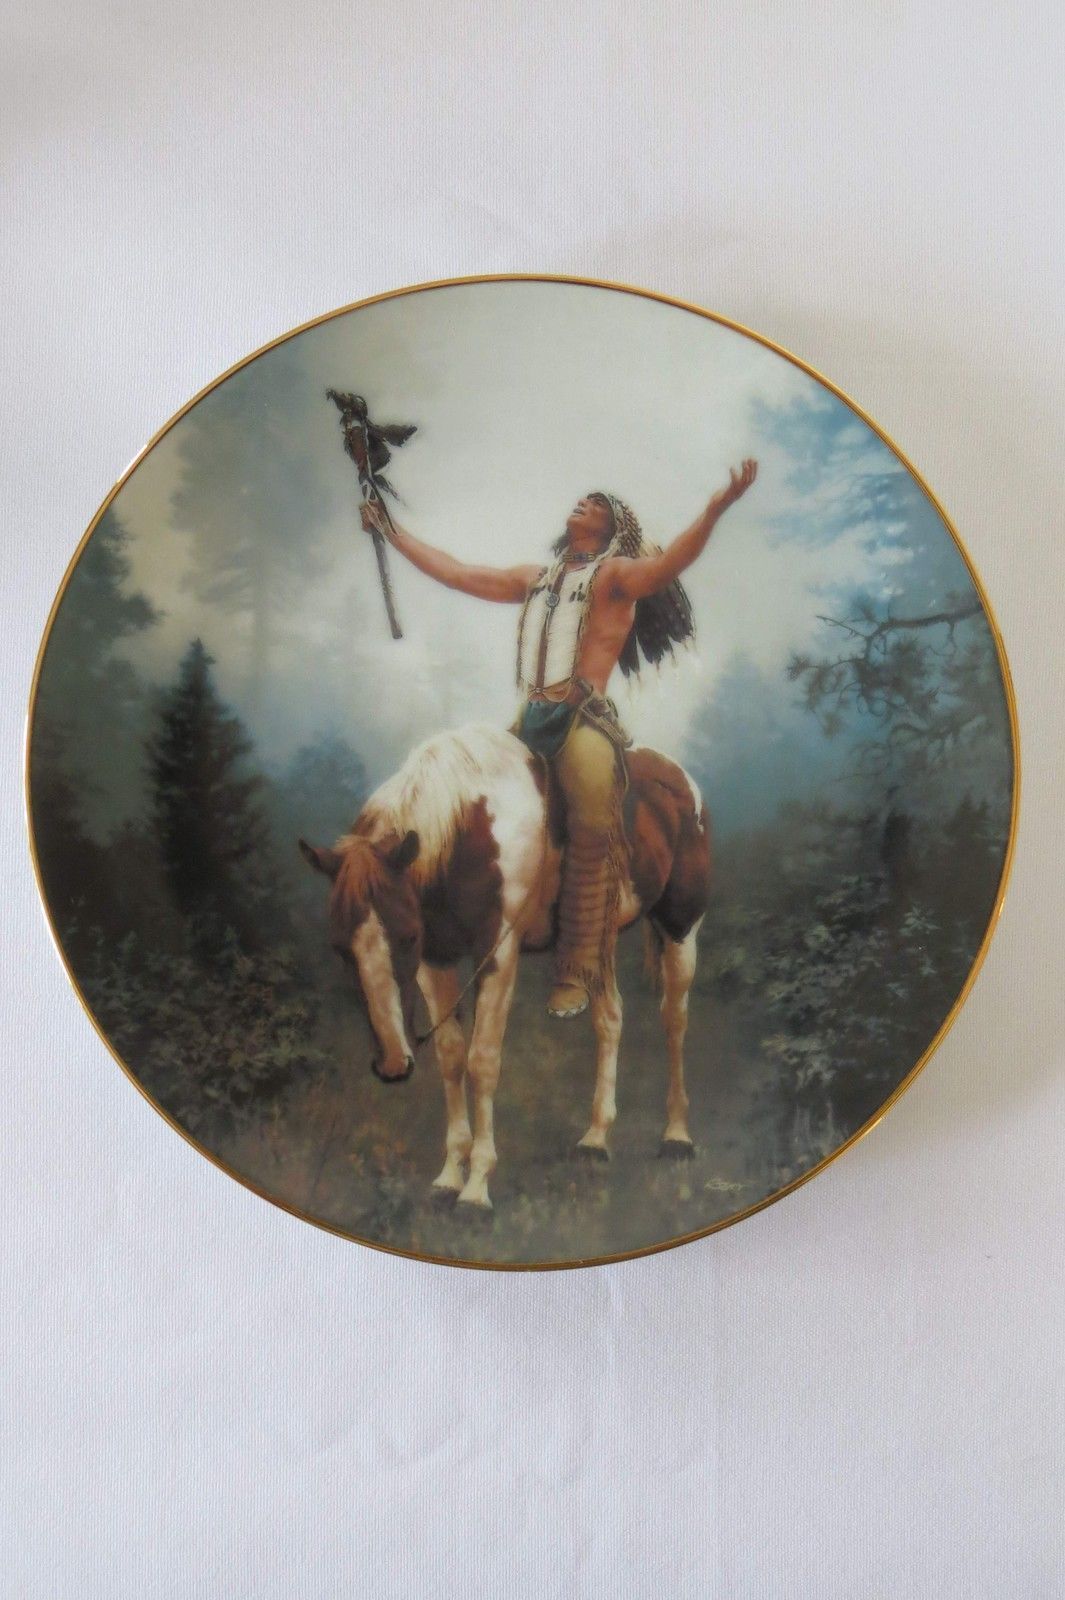 The 1992 Hamilton Collection Deliverance by Check Ren Collectors Plate - $9.49